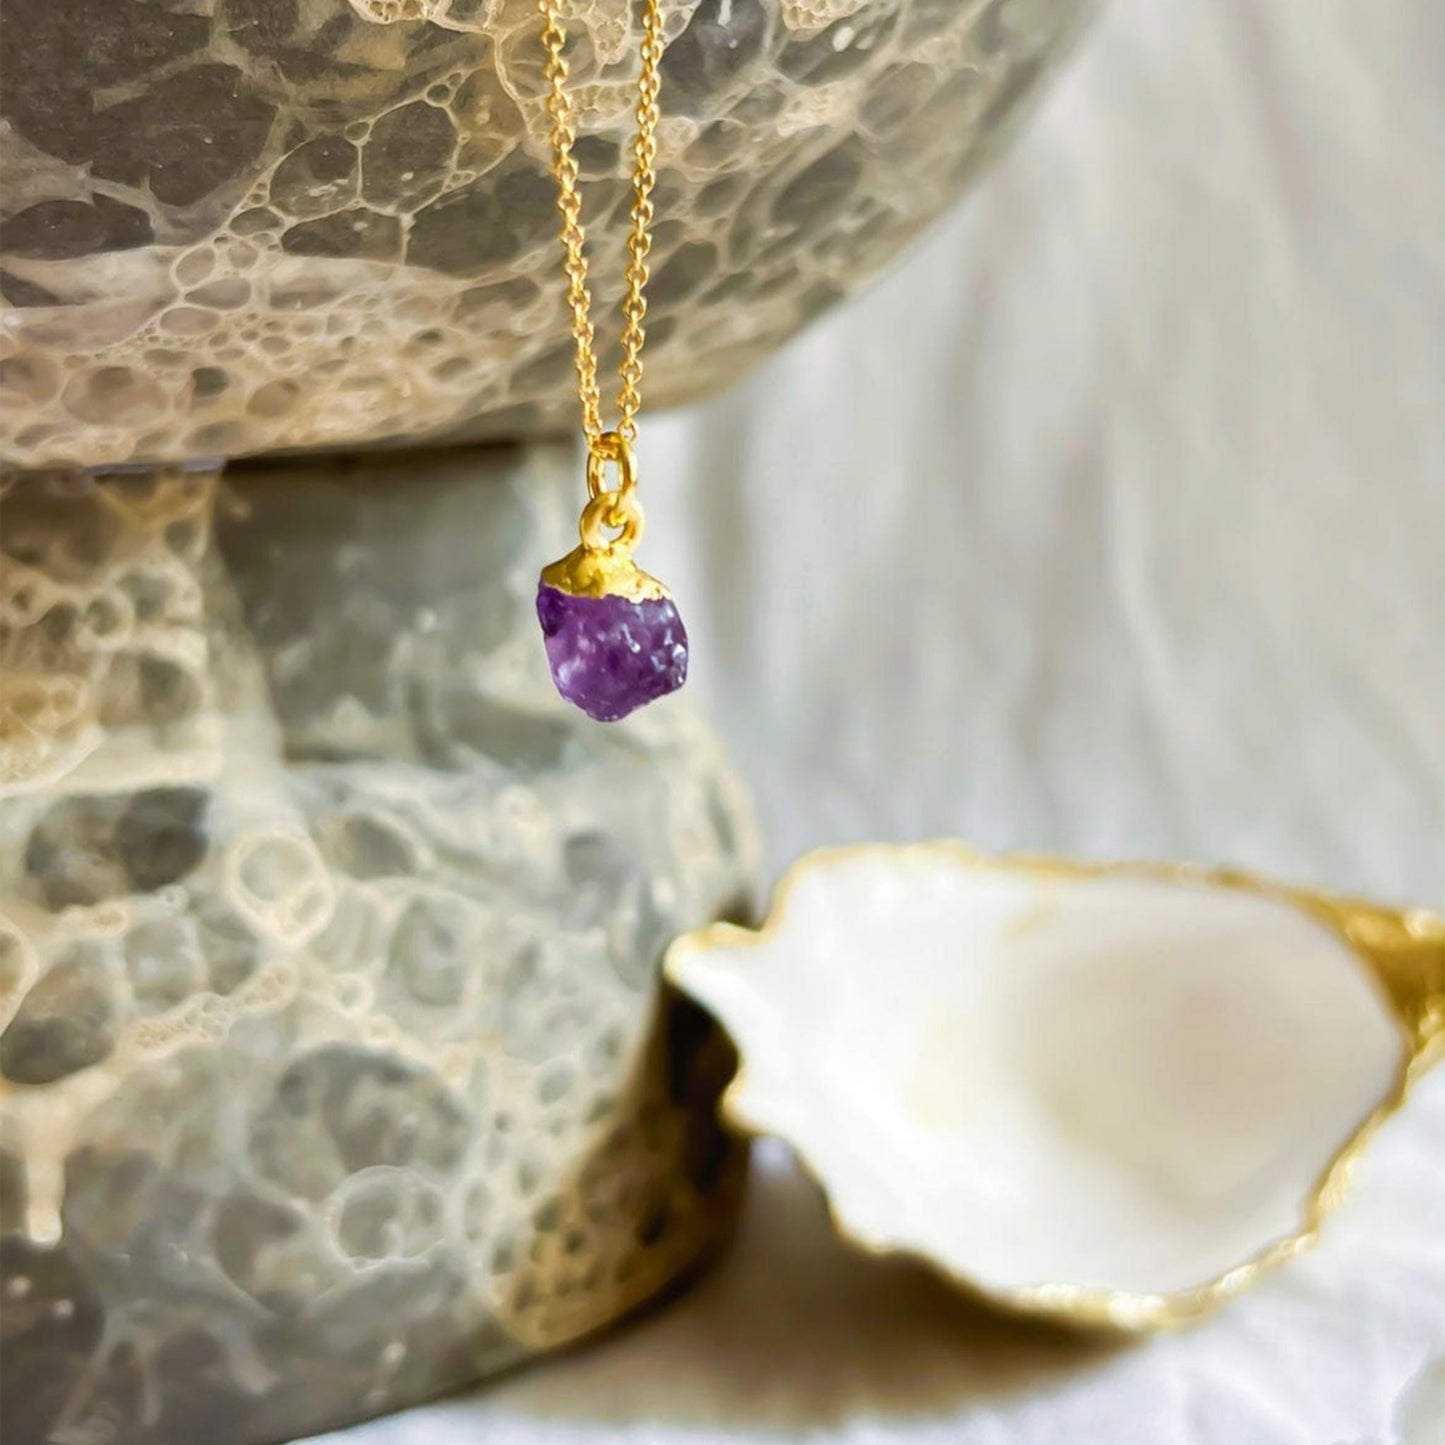 Raw Amethyst Pendant Necklace - Healing Crystal Jewellery | By Lunar James